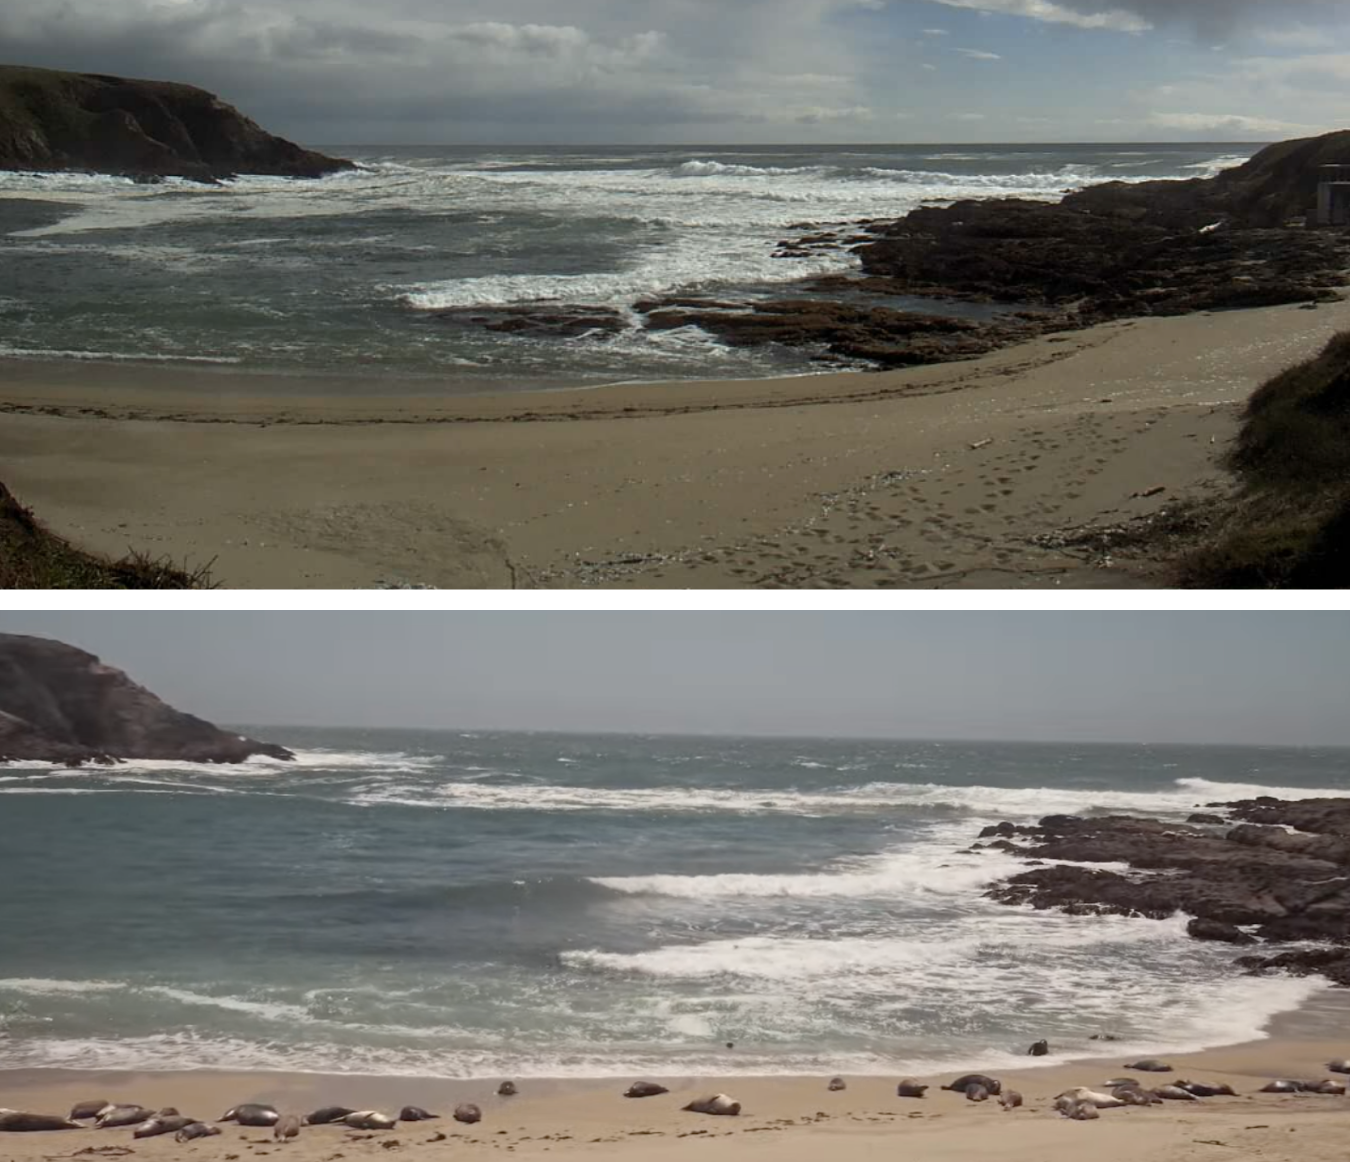 On top is a blurry image of Horseshoe Cove from the old camera, shot at 1 photo per 10 minutes. Bottom, images of Horseshoe Cove from the new camera, where baby seals can be seen basking in the sun, shot at live stream, 720p.